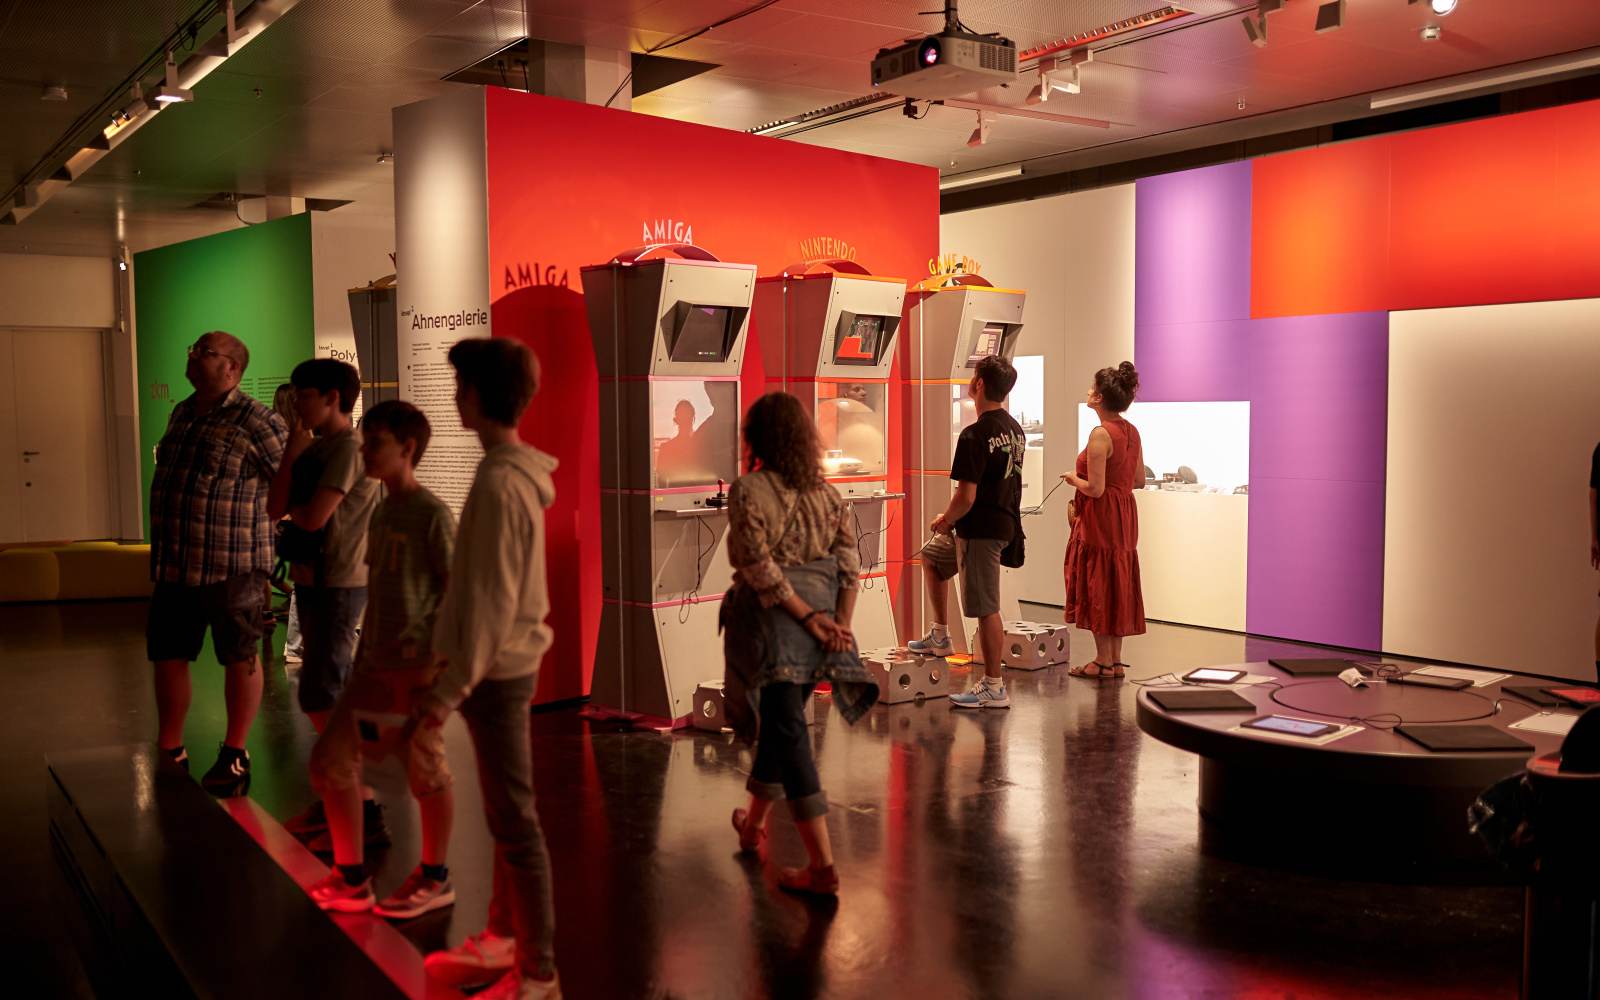 Exhibition view zkm_gameplay. the next level. Several people are standing in front of different slot machines, which are placed in front of a red wall.